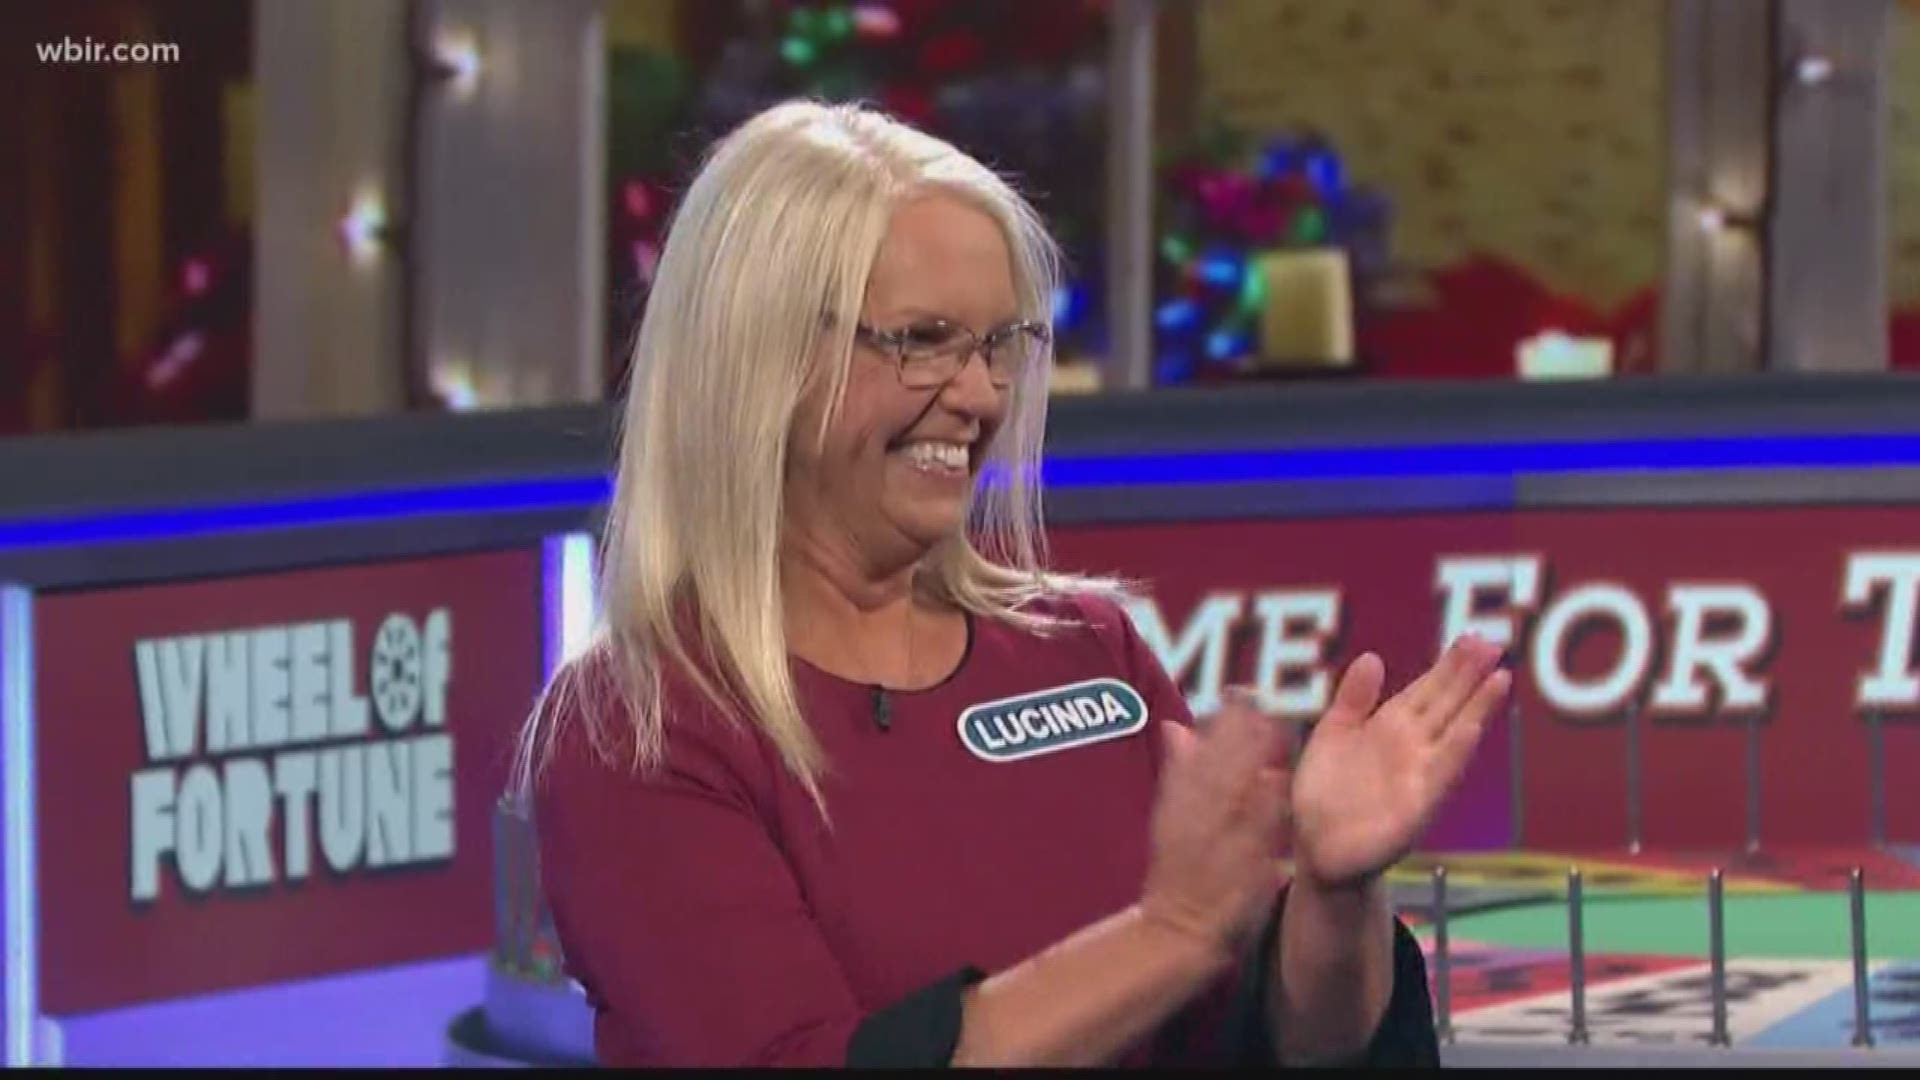 A Knoxville woman is now celebrating her big win on Wheel of Fortune!